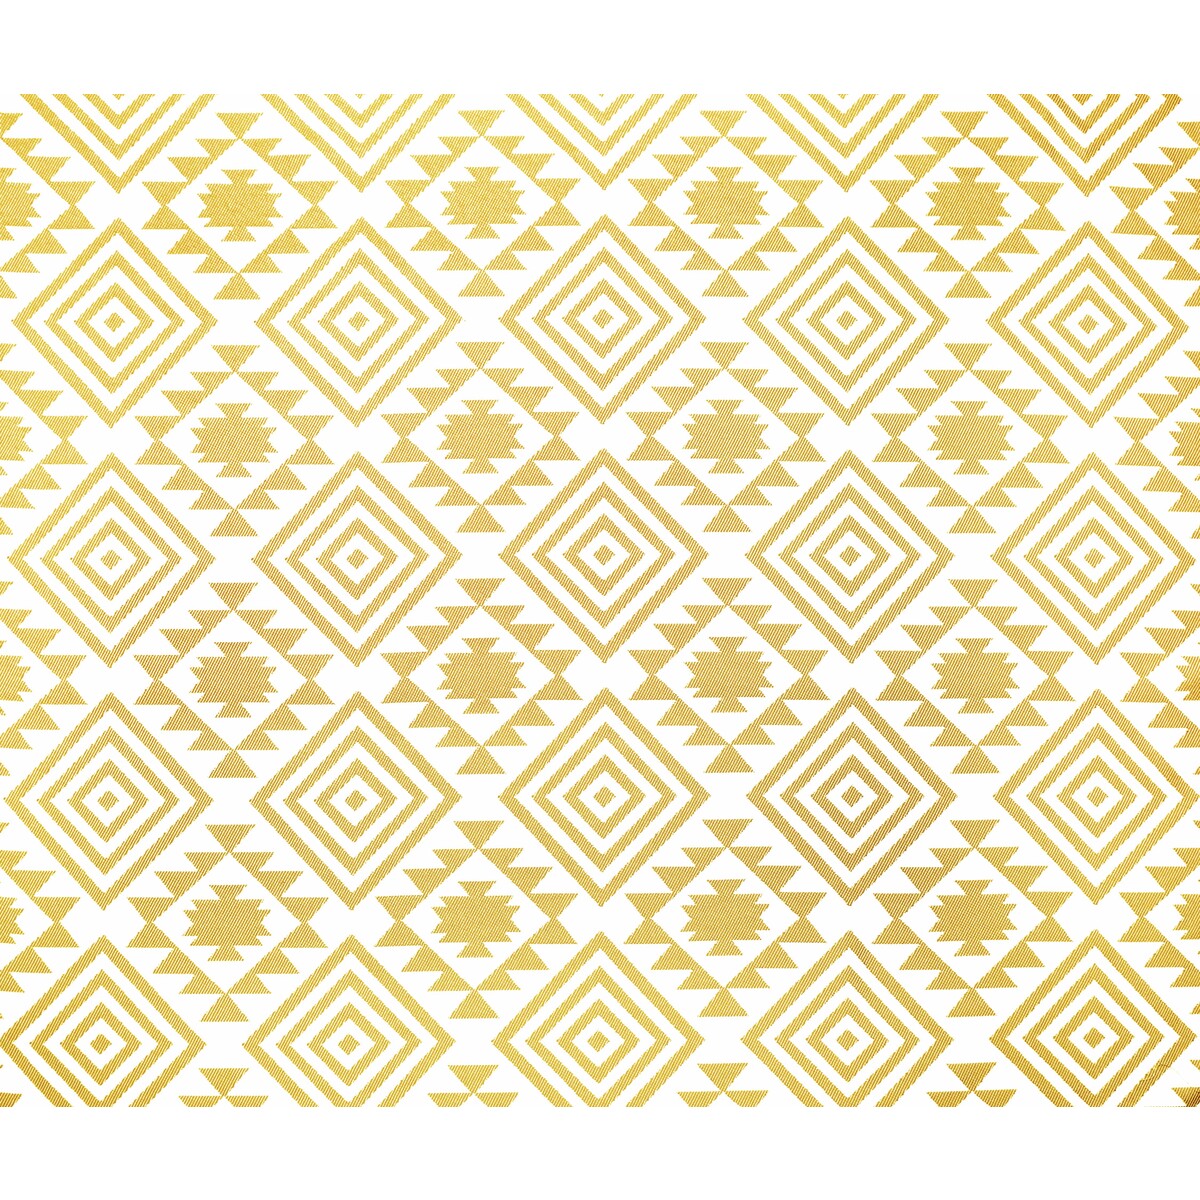 Ava fabric in amarillo color - pattern GDT5383.6.0 - by Gaston y Daniela in the Gaston Africalia collection